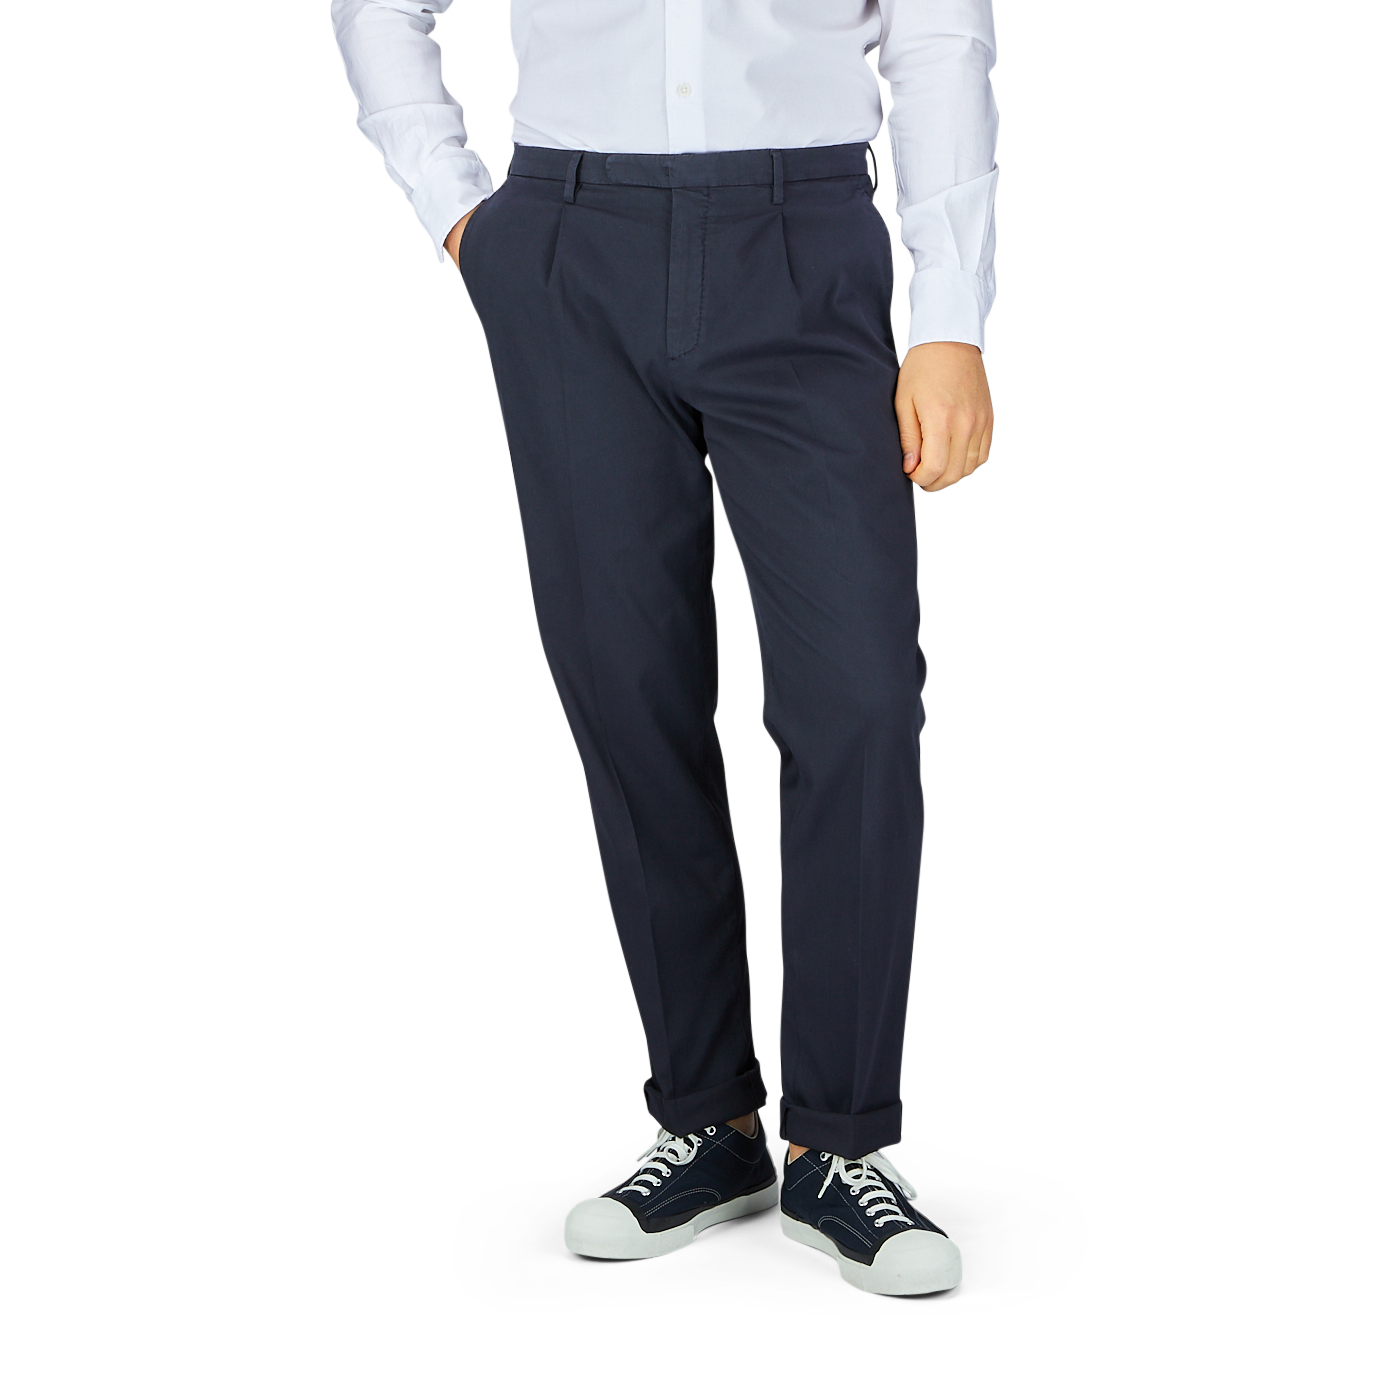 A person standing wearing Boglioli navy blue washed cotton pleated trousers and a white shirt with black and white sneakers.